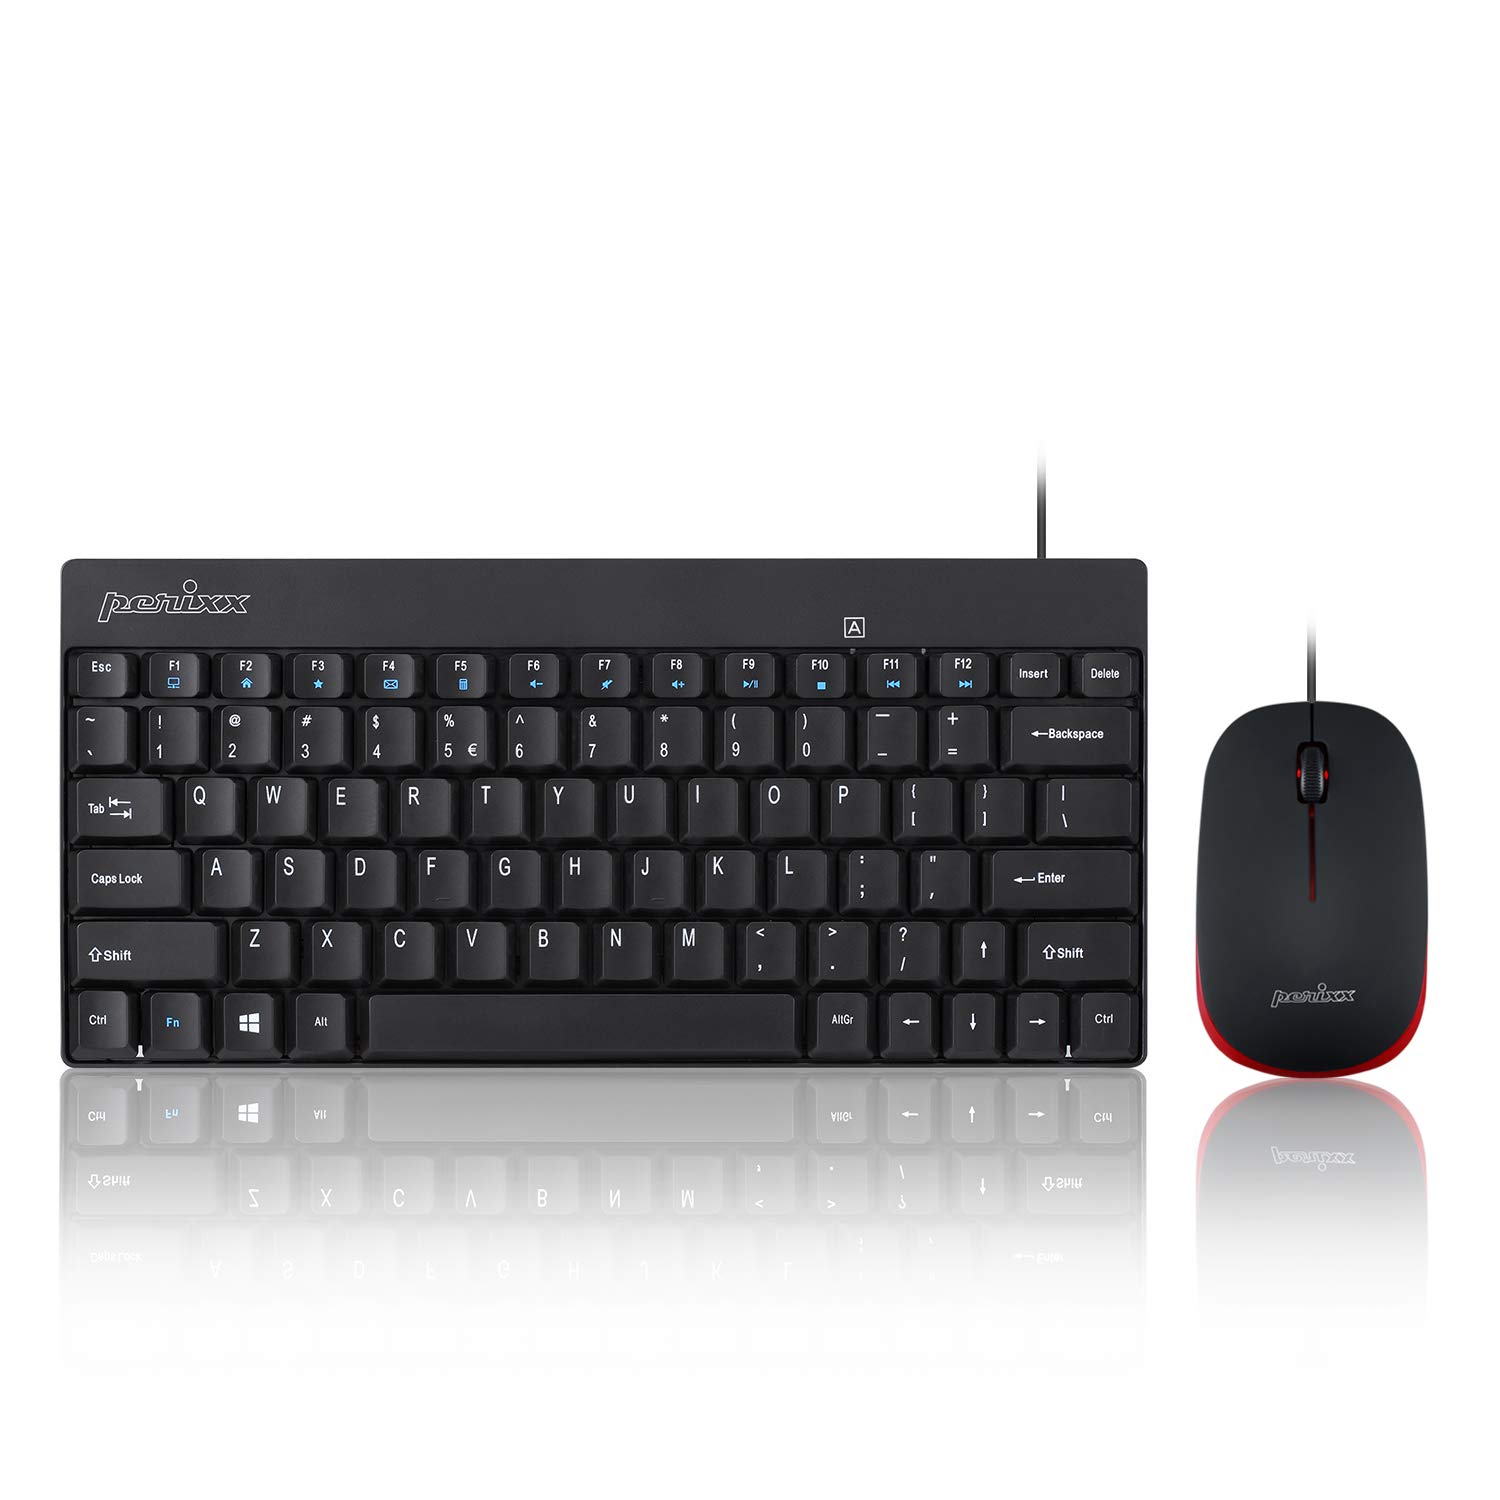 Perixx Periduo-212 Wired Mini Keyboard and Mouse Set, USB Connection, Black, US English Layout (11486)